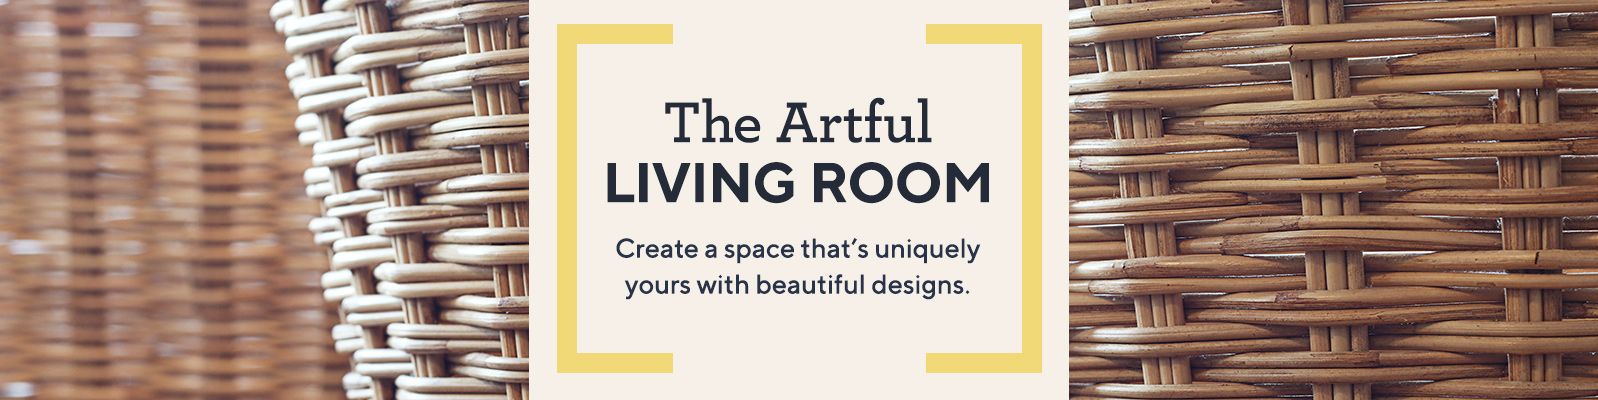 The Artful Living Room Create a space that's uniquely yours with beautiful designs.